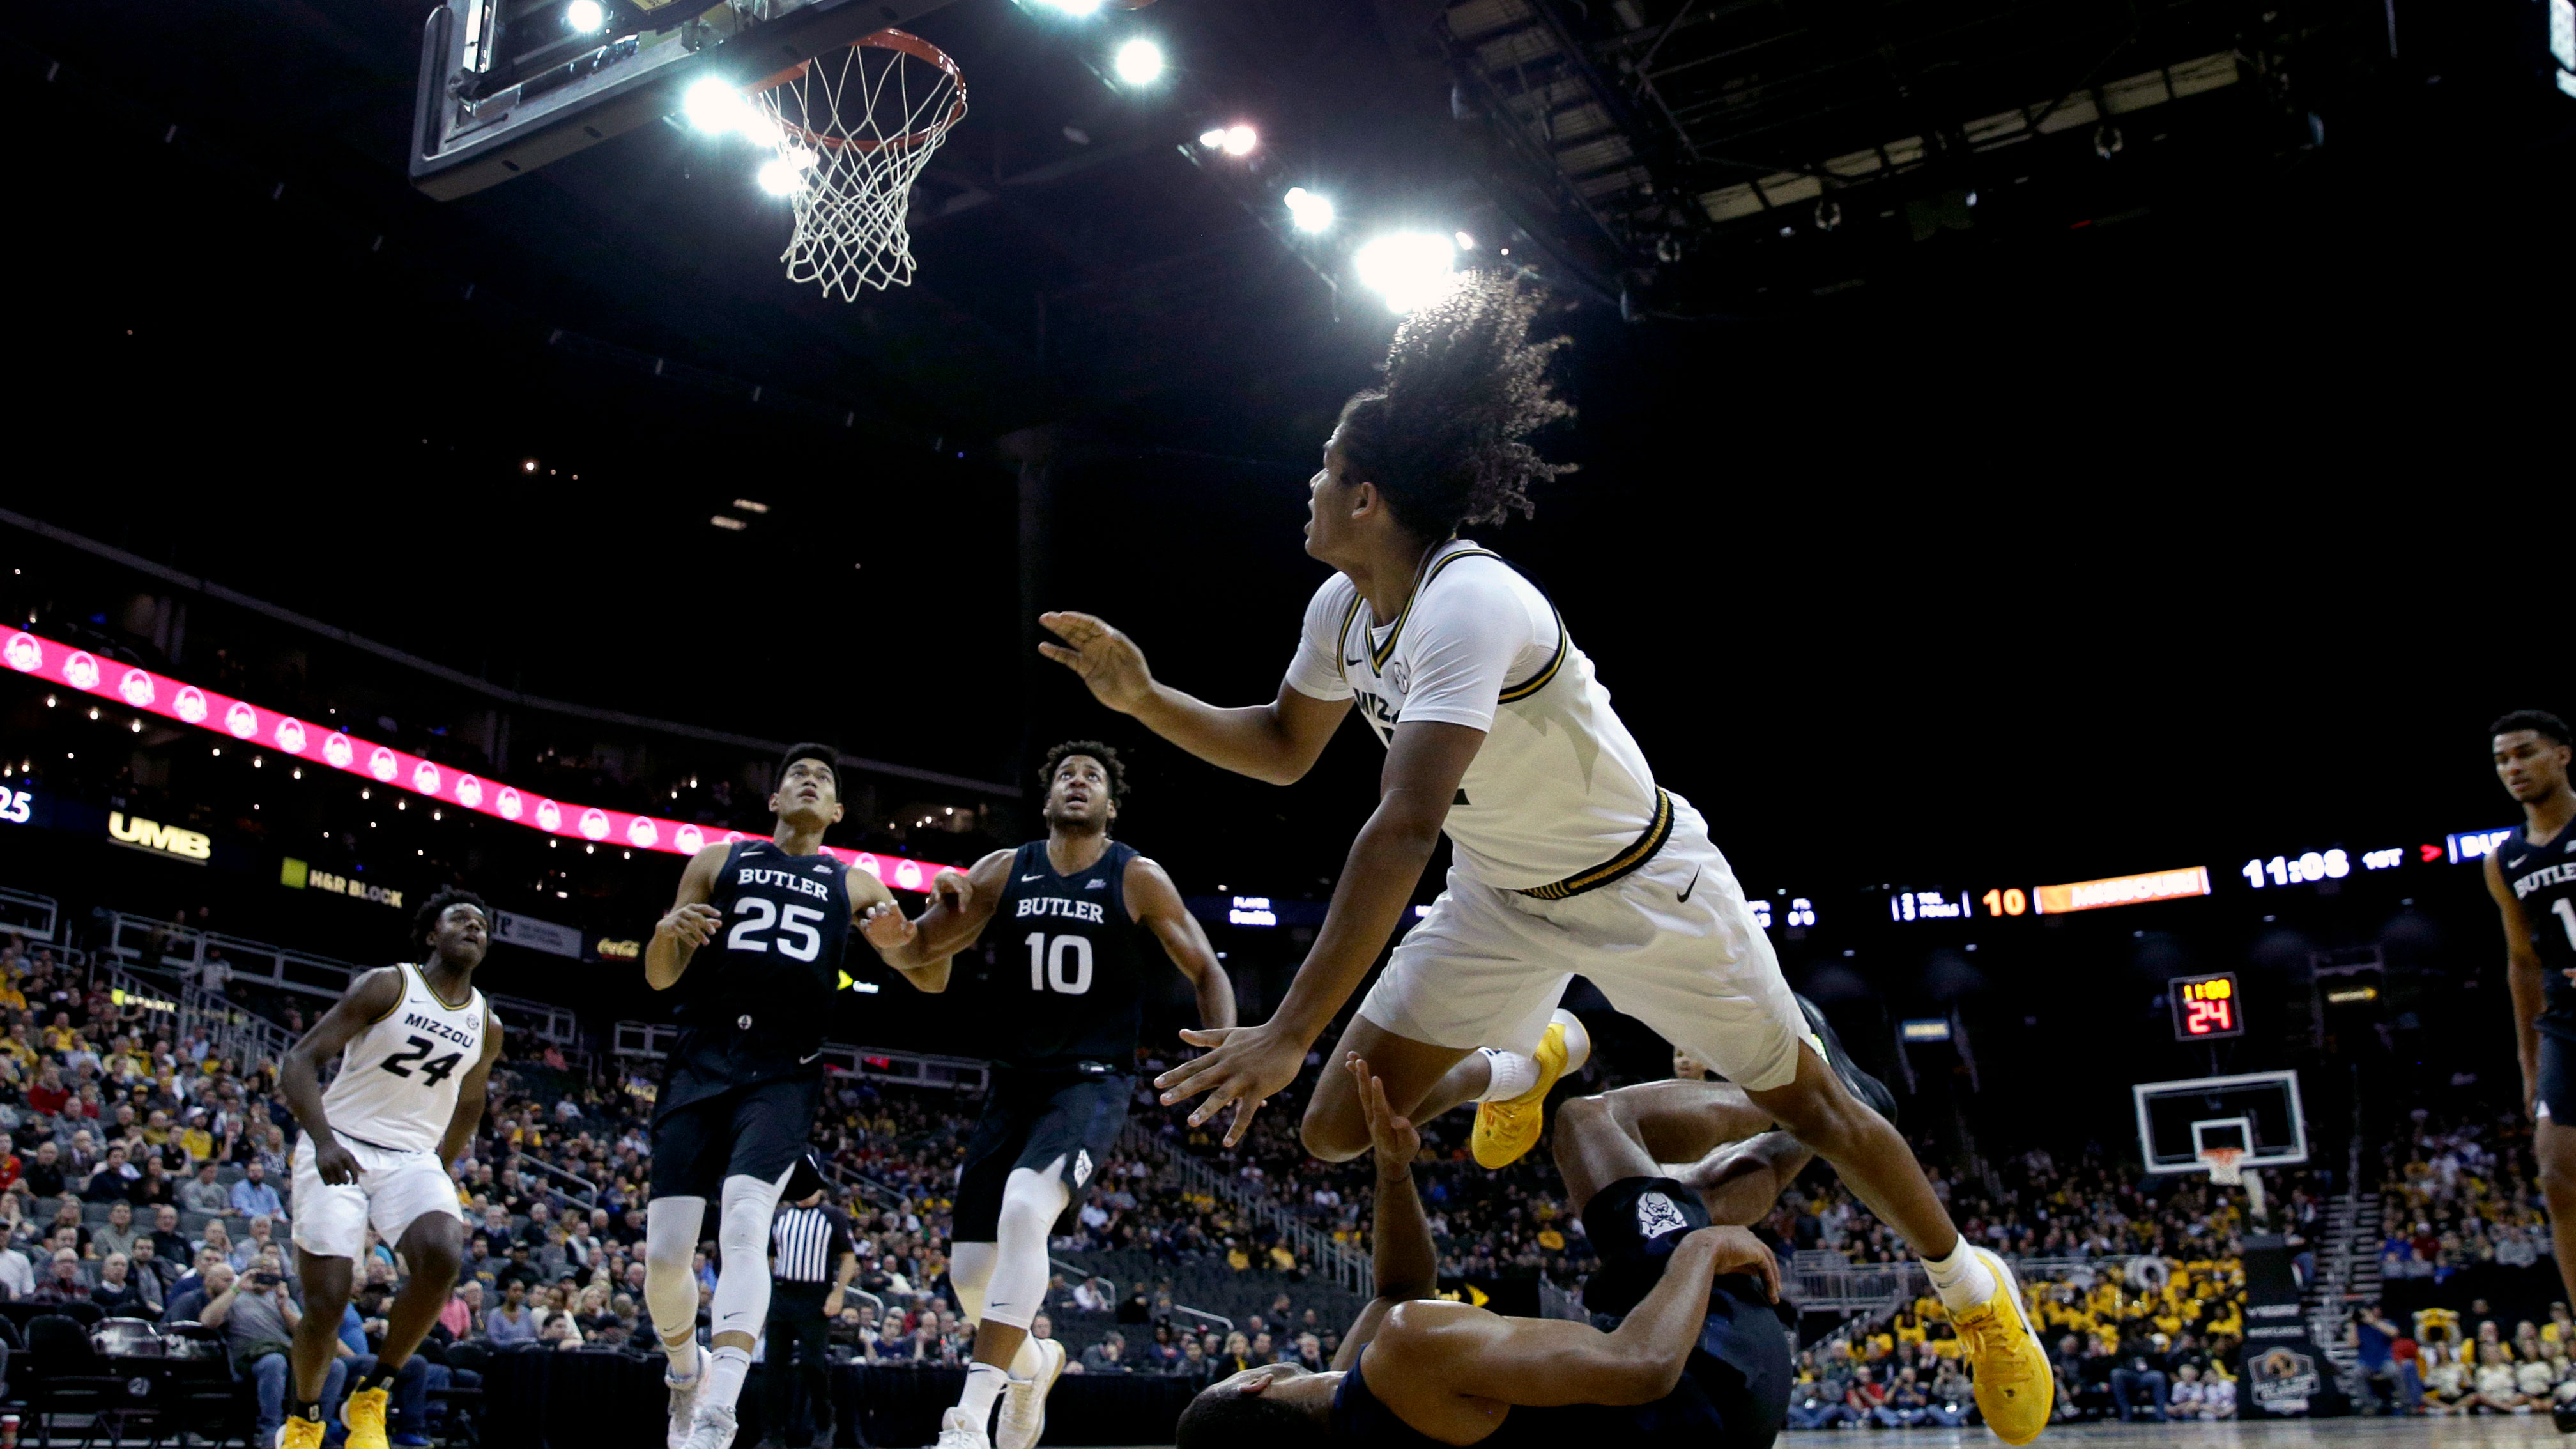 Mizzou falls behind early, can't topple Butler in 63-52 loss